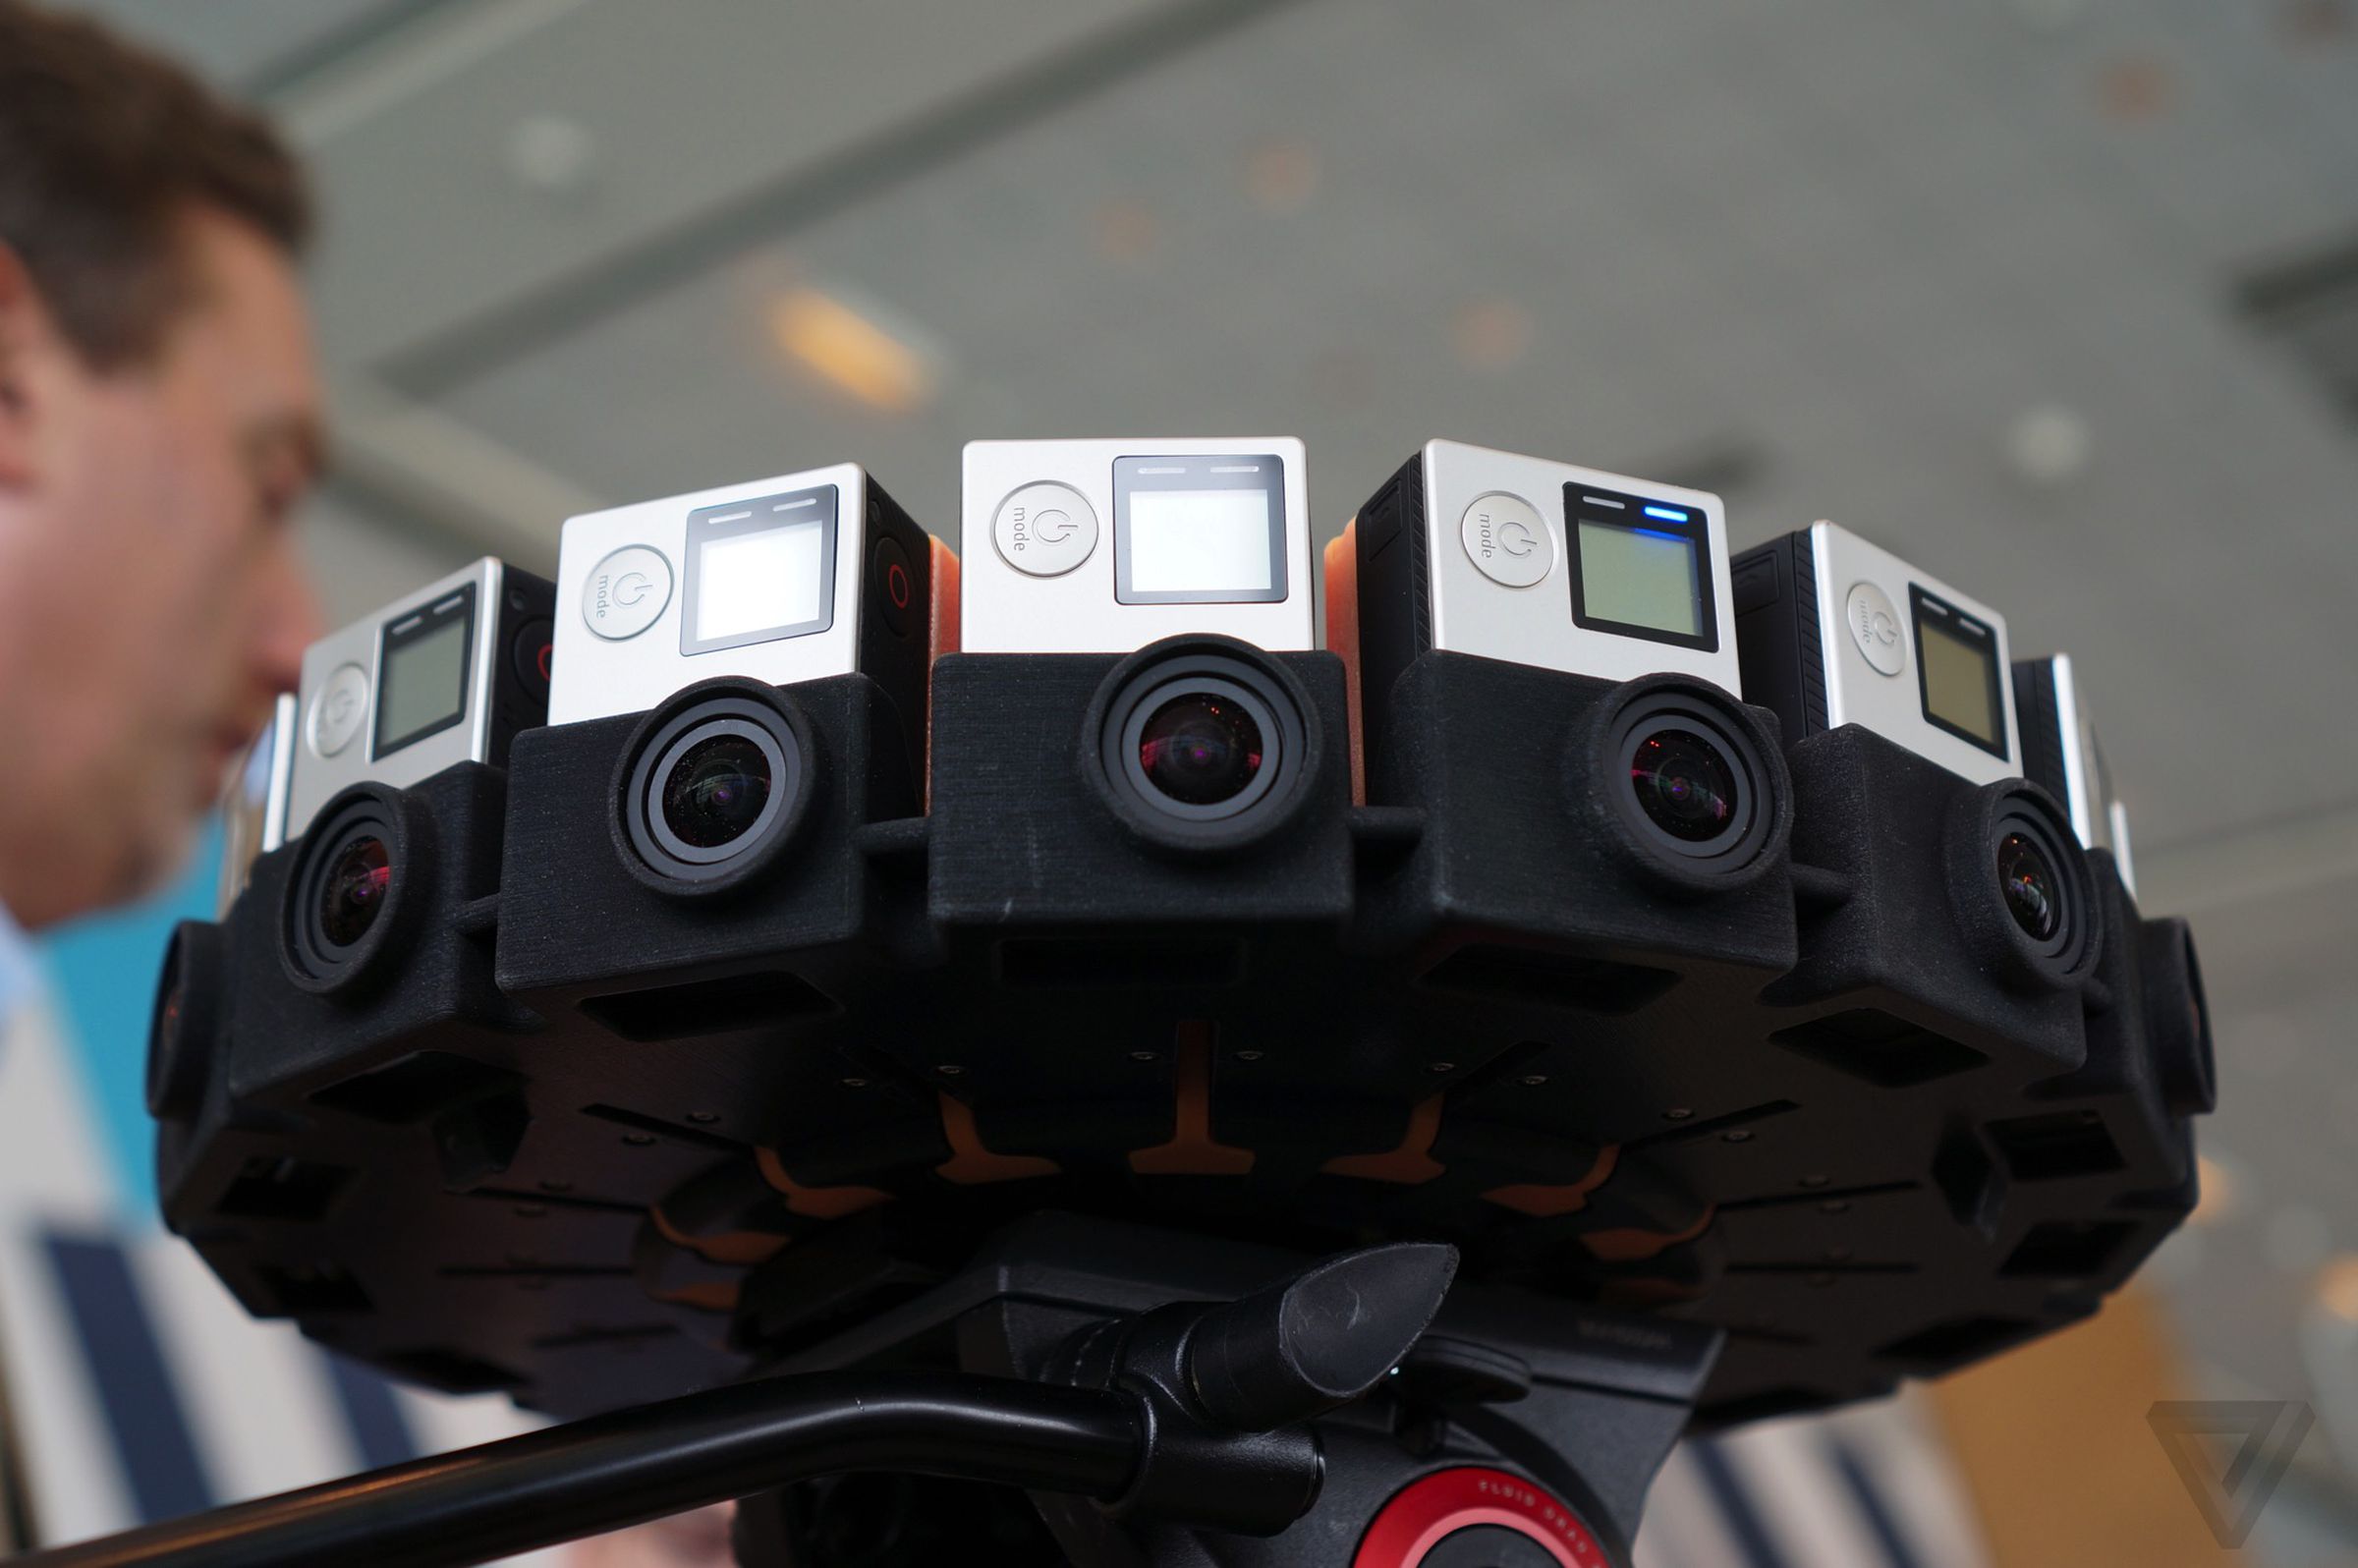 Hands on with the GoPro Jump VR camara rig